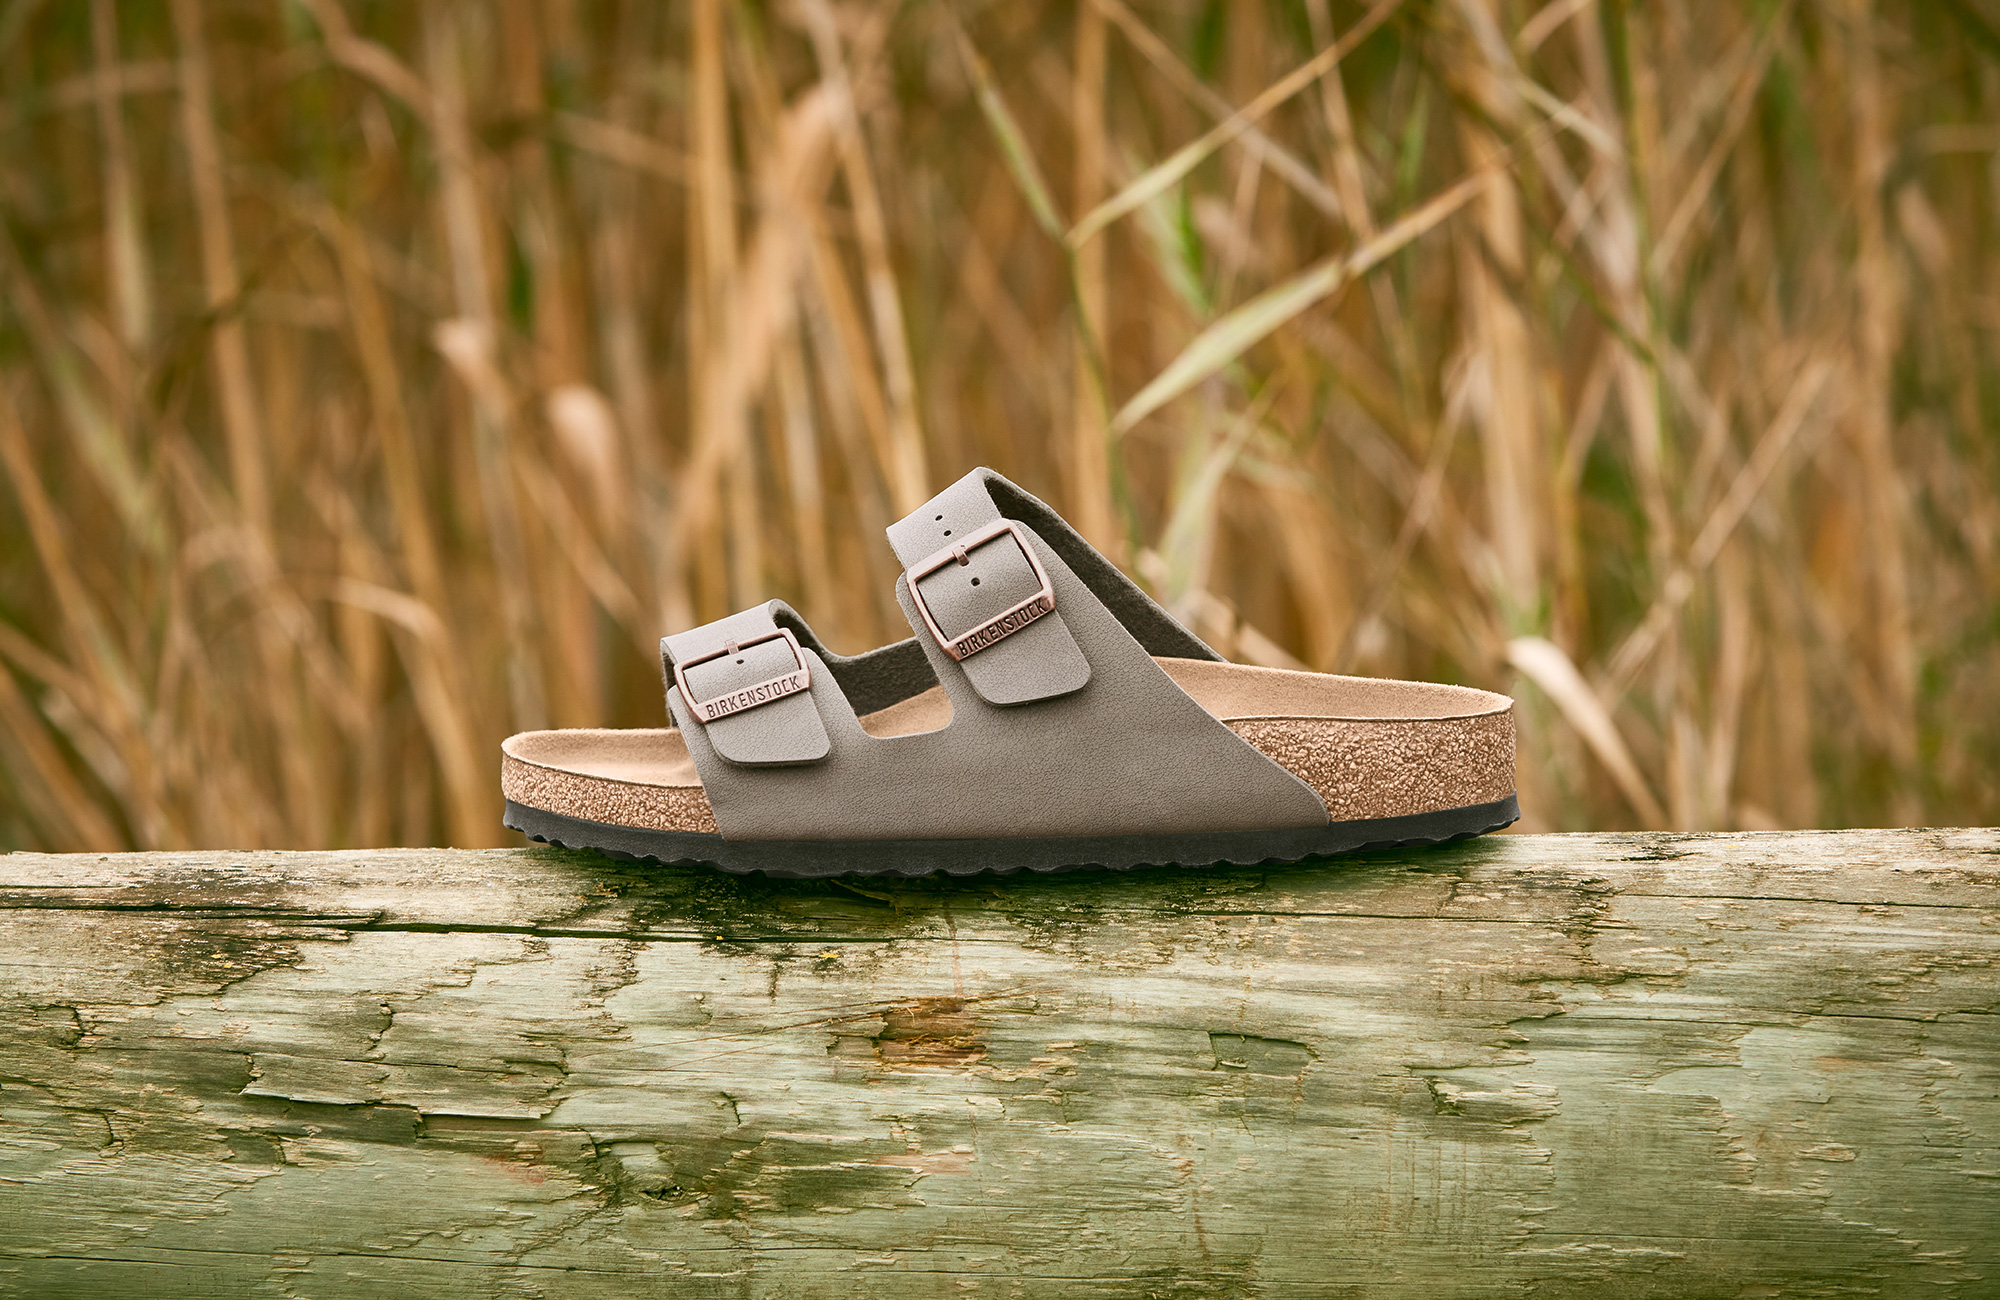 Birkenstock focuses on premium products, as revenue jumps 20% - Glossy